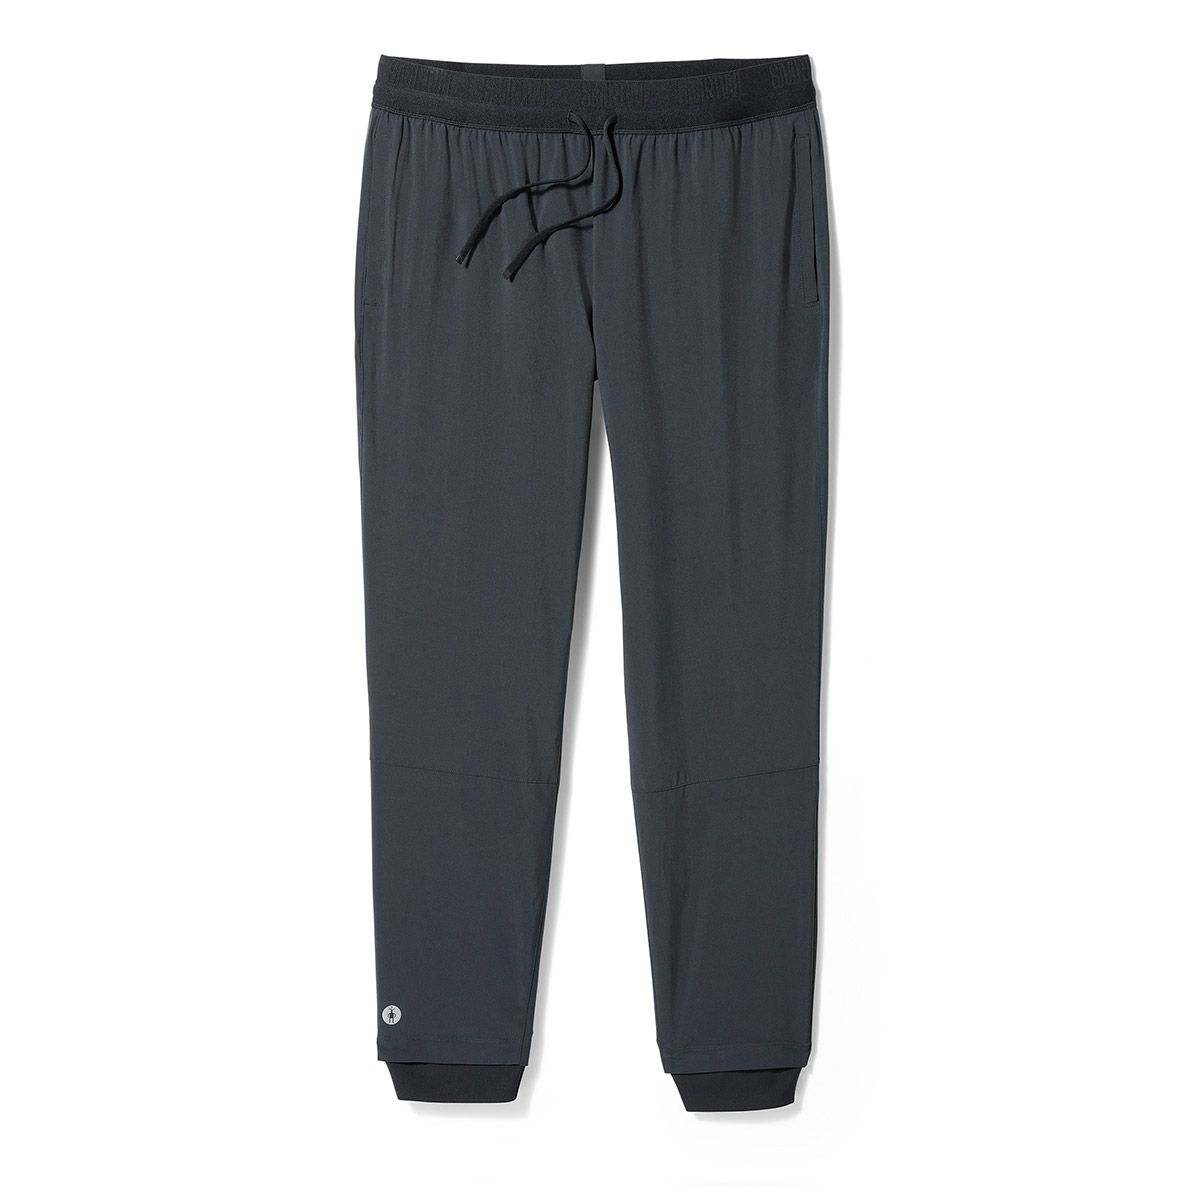 NWT Danskin Terry Jogger Pant W/ Pockets Charcoal Grey Heather XS S M L XL  - AAA Polymer